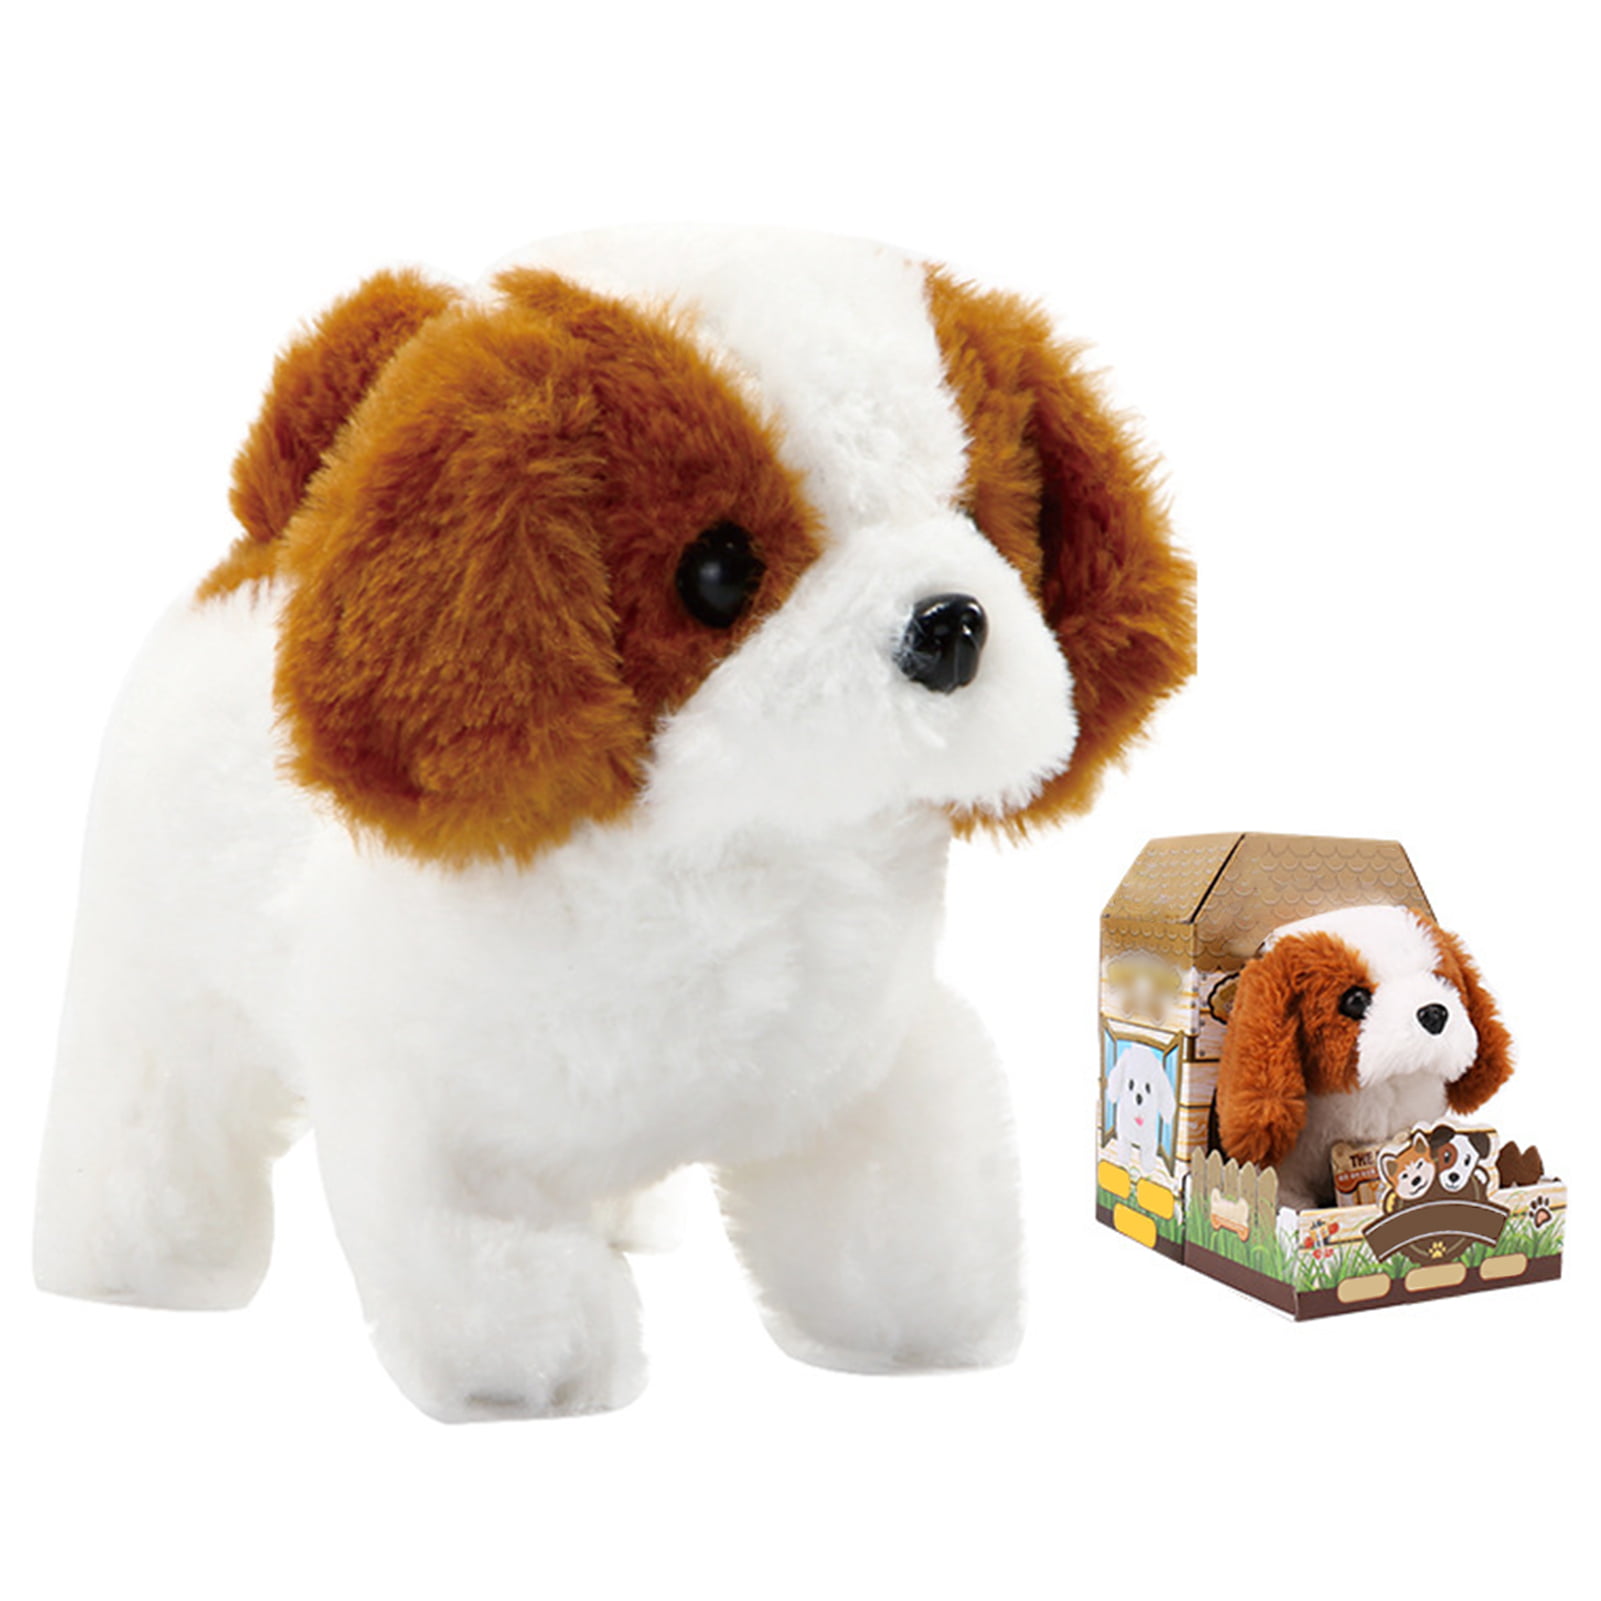 Walking Dog Toys,Barking Puppy Pet Dogs,Walking Barking,Wagging Tails,Interactive Toy Dogs For Kids,Cultivating Children To Love Animals Since Childhood,The Best Gift To Accompany Your Child's Growth 